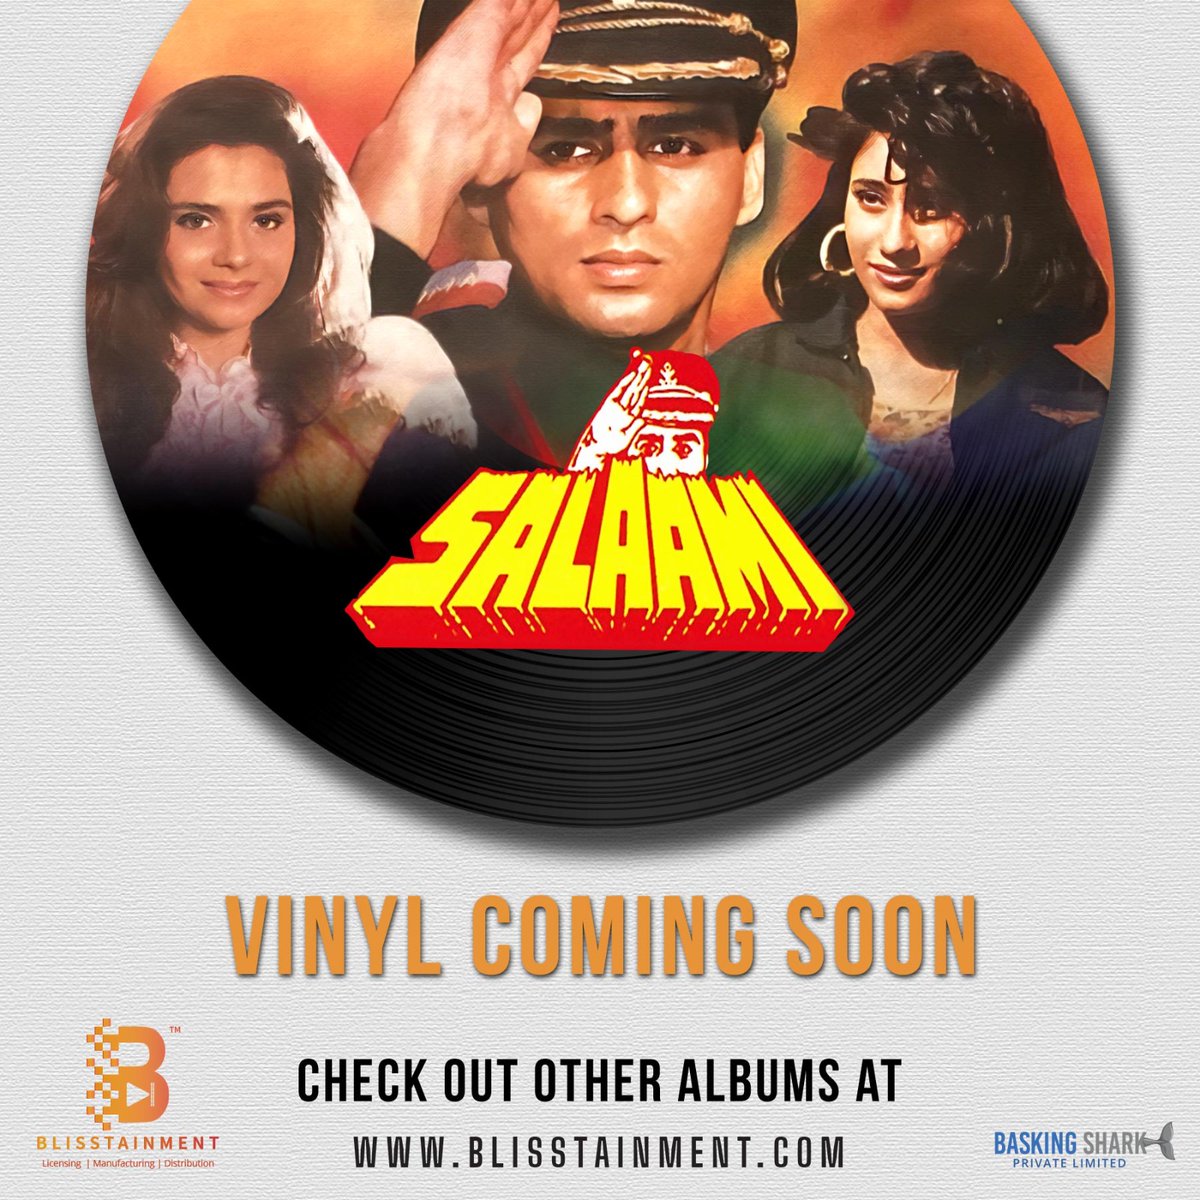 Add nostalgia to your vinyl collection with the limited edition Salaami in Black LP format! Coming soon on Blisstainment.
#SalaamiInBlack #90sBollywood #VinylCollection #Nostalgia #LimitedEdition #Music #NadeemShravan #Blisstainment #LPFormat #RareGem #IconicMusic #BollywoodFilm